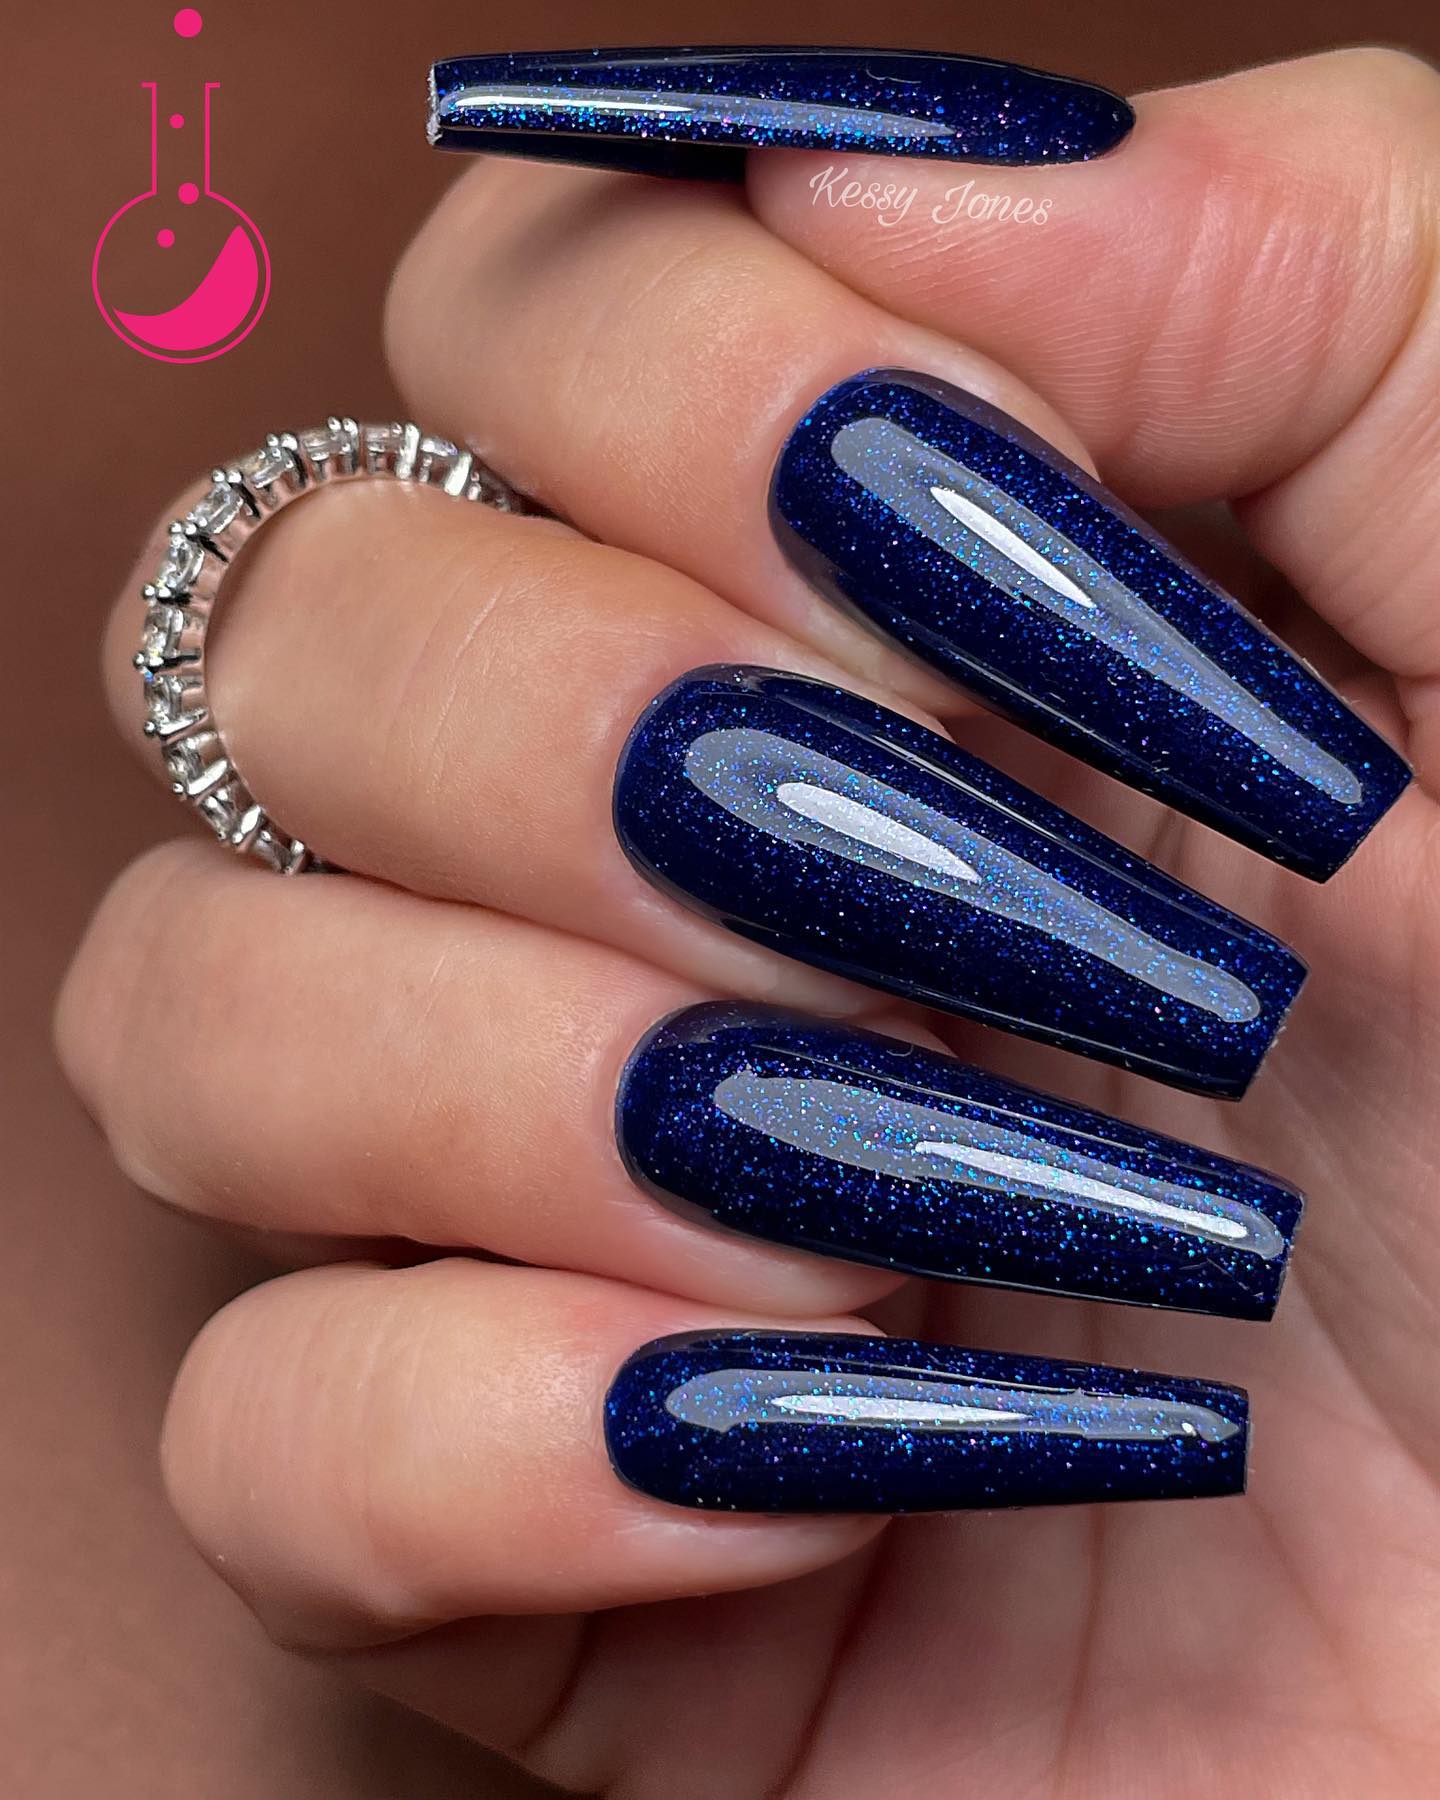 Glittered nails are a great way to express yourself. Navy blue is a really cool color, and the glitter adds some fun to it. The glitter is also a great way to show off your personality, and it's fun for people who like shiny things.